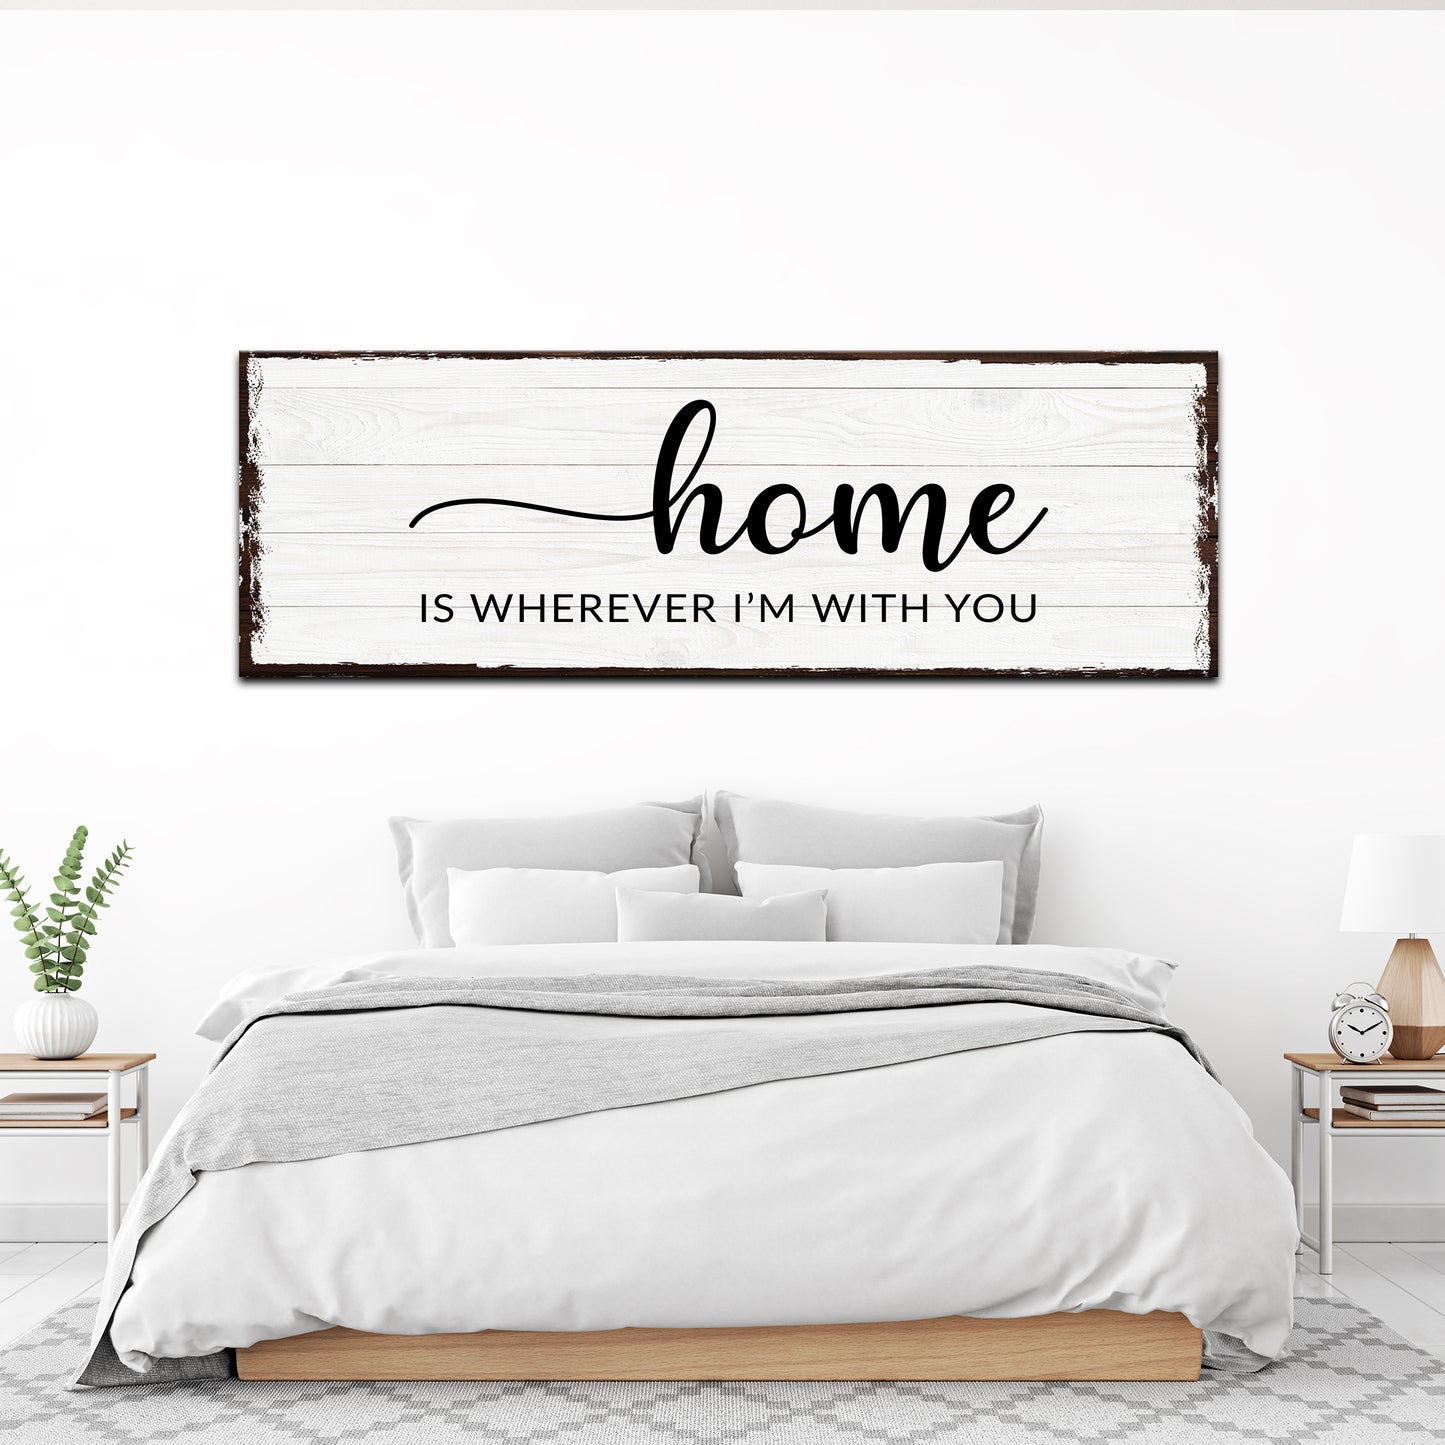 Home is Wherever I'm with You Sign II - Image by Tailored Canvases